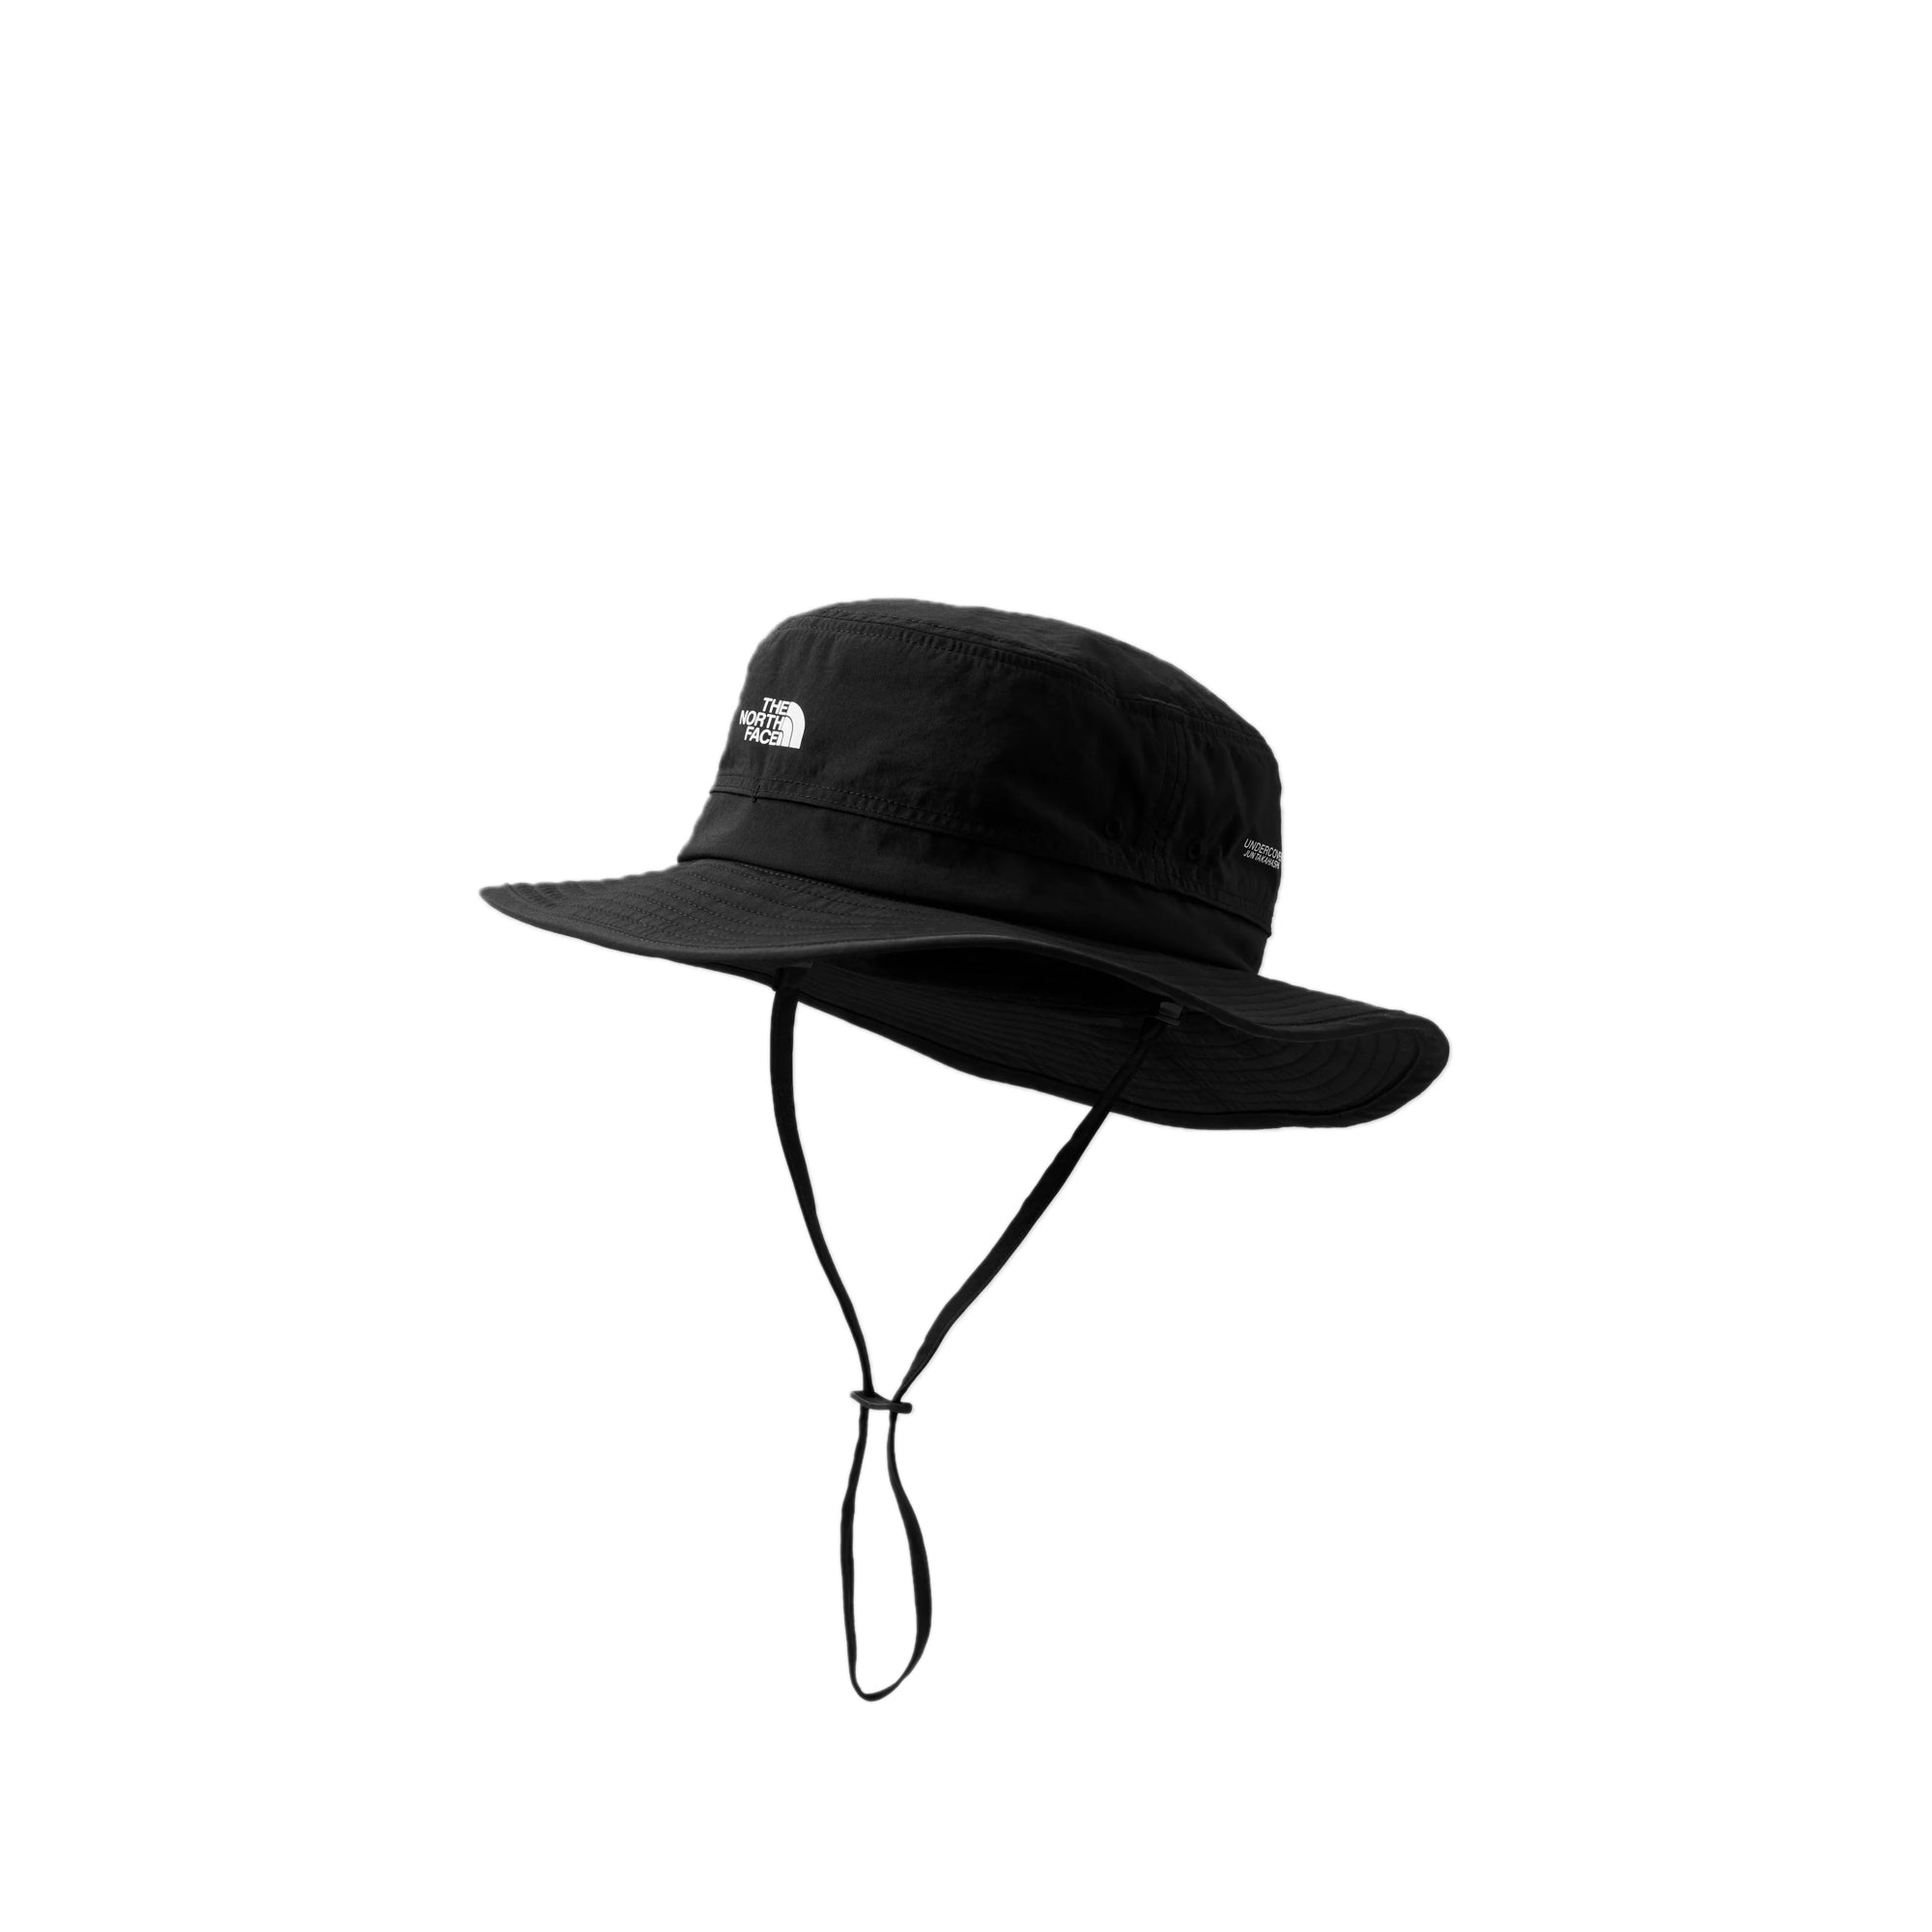 The North Face x Undercover Soukuu Unisex Hike Sun Brimmer Hat